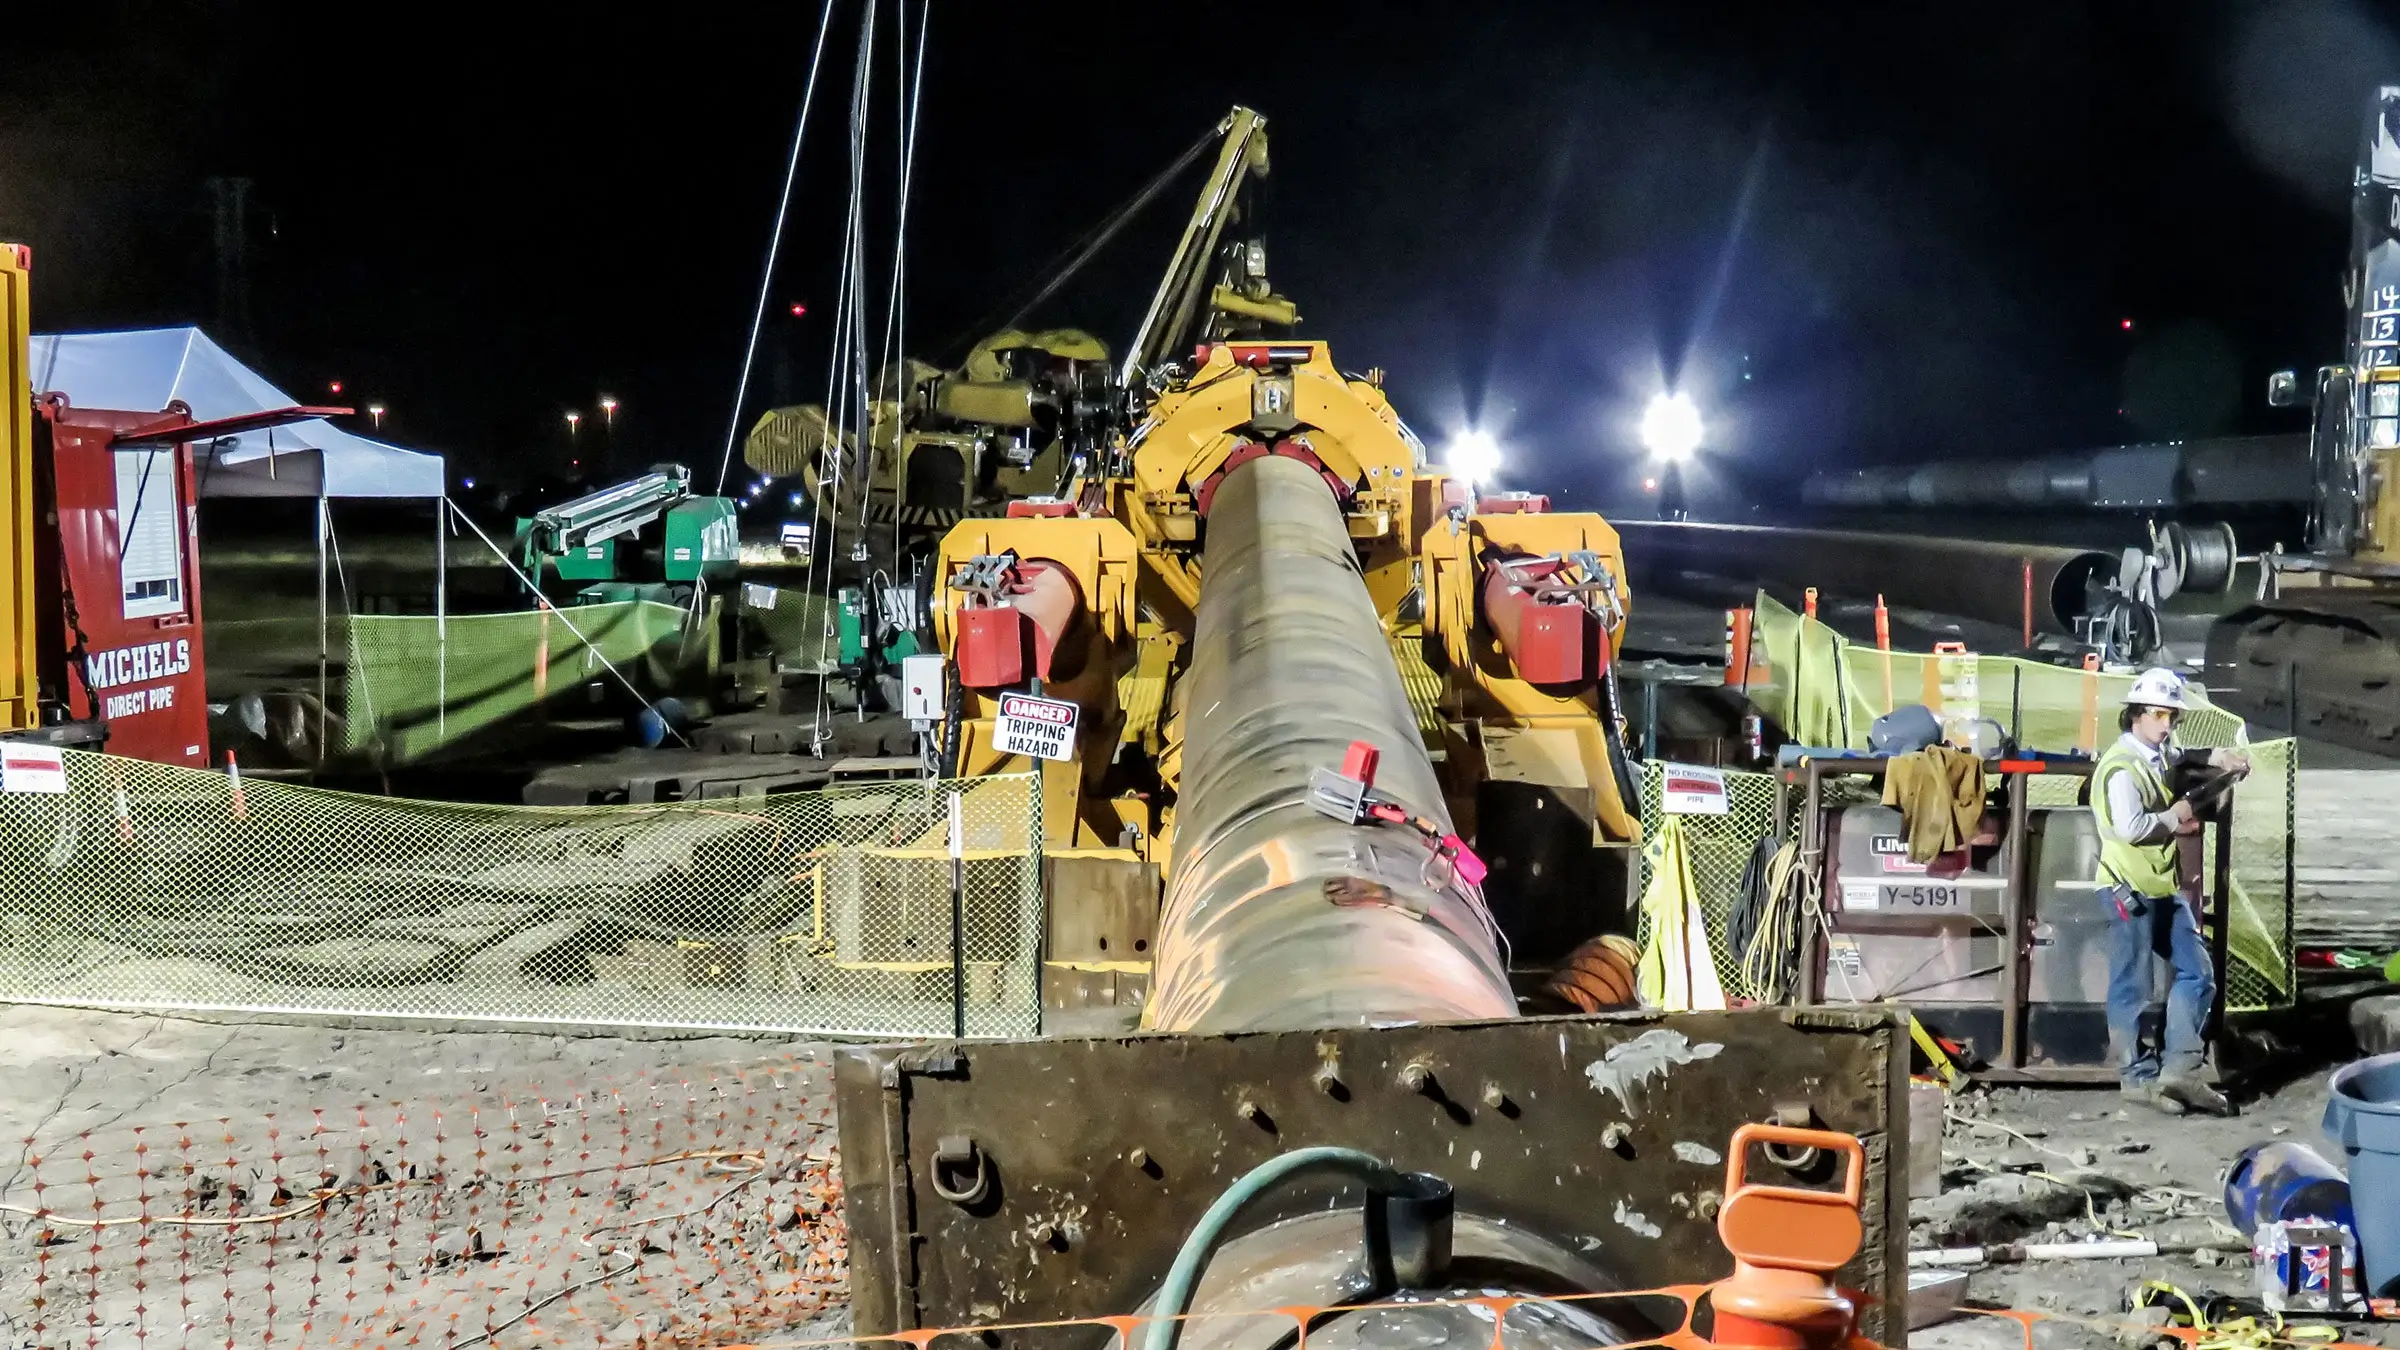 A Direct Pipe machine operates on a jobsite at night.